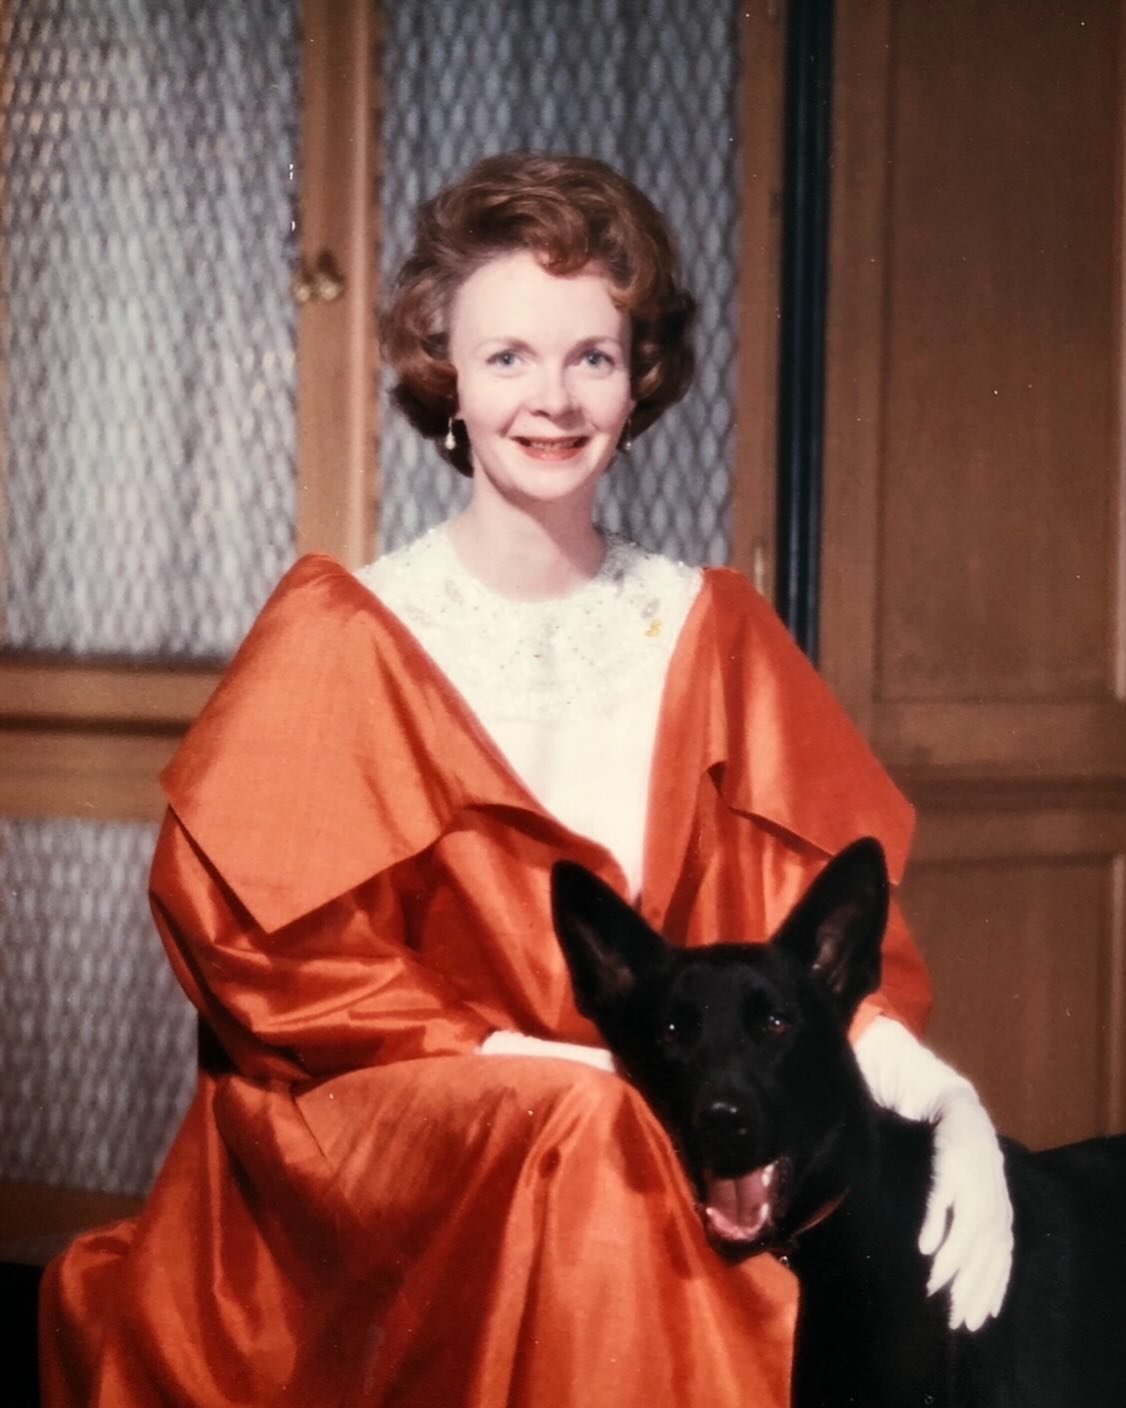 A portrait of my Mother in the late 1950&rsquo;s with Bruno. She is wearing a bright orange full length evening coat she had custom made in Hong Kong on one of my parents many trips there. Those pearl earrings are still with me.

I love this portrait